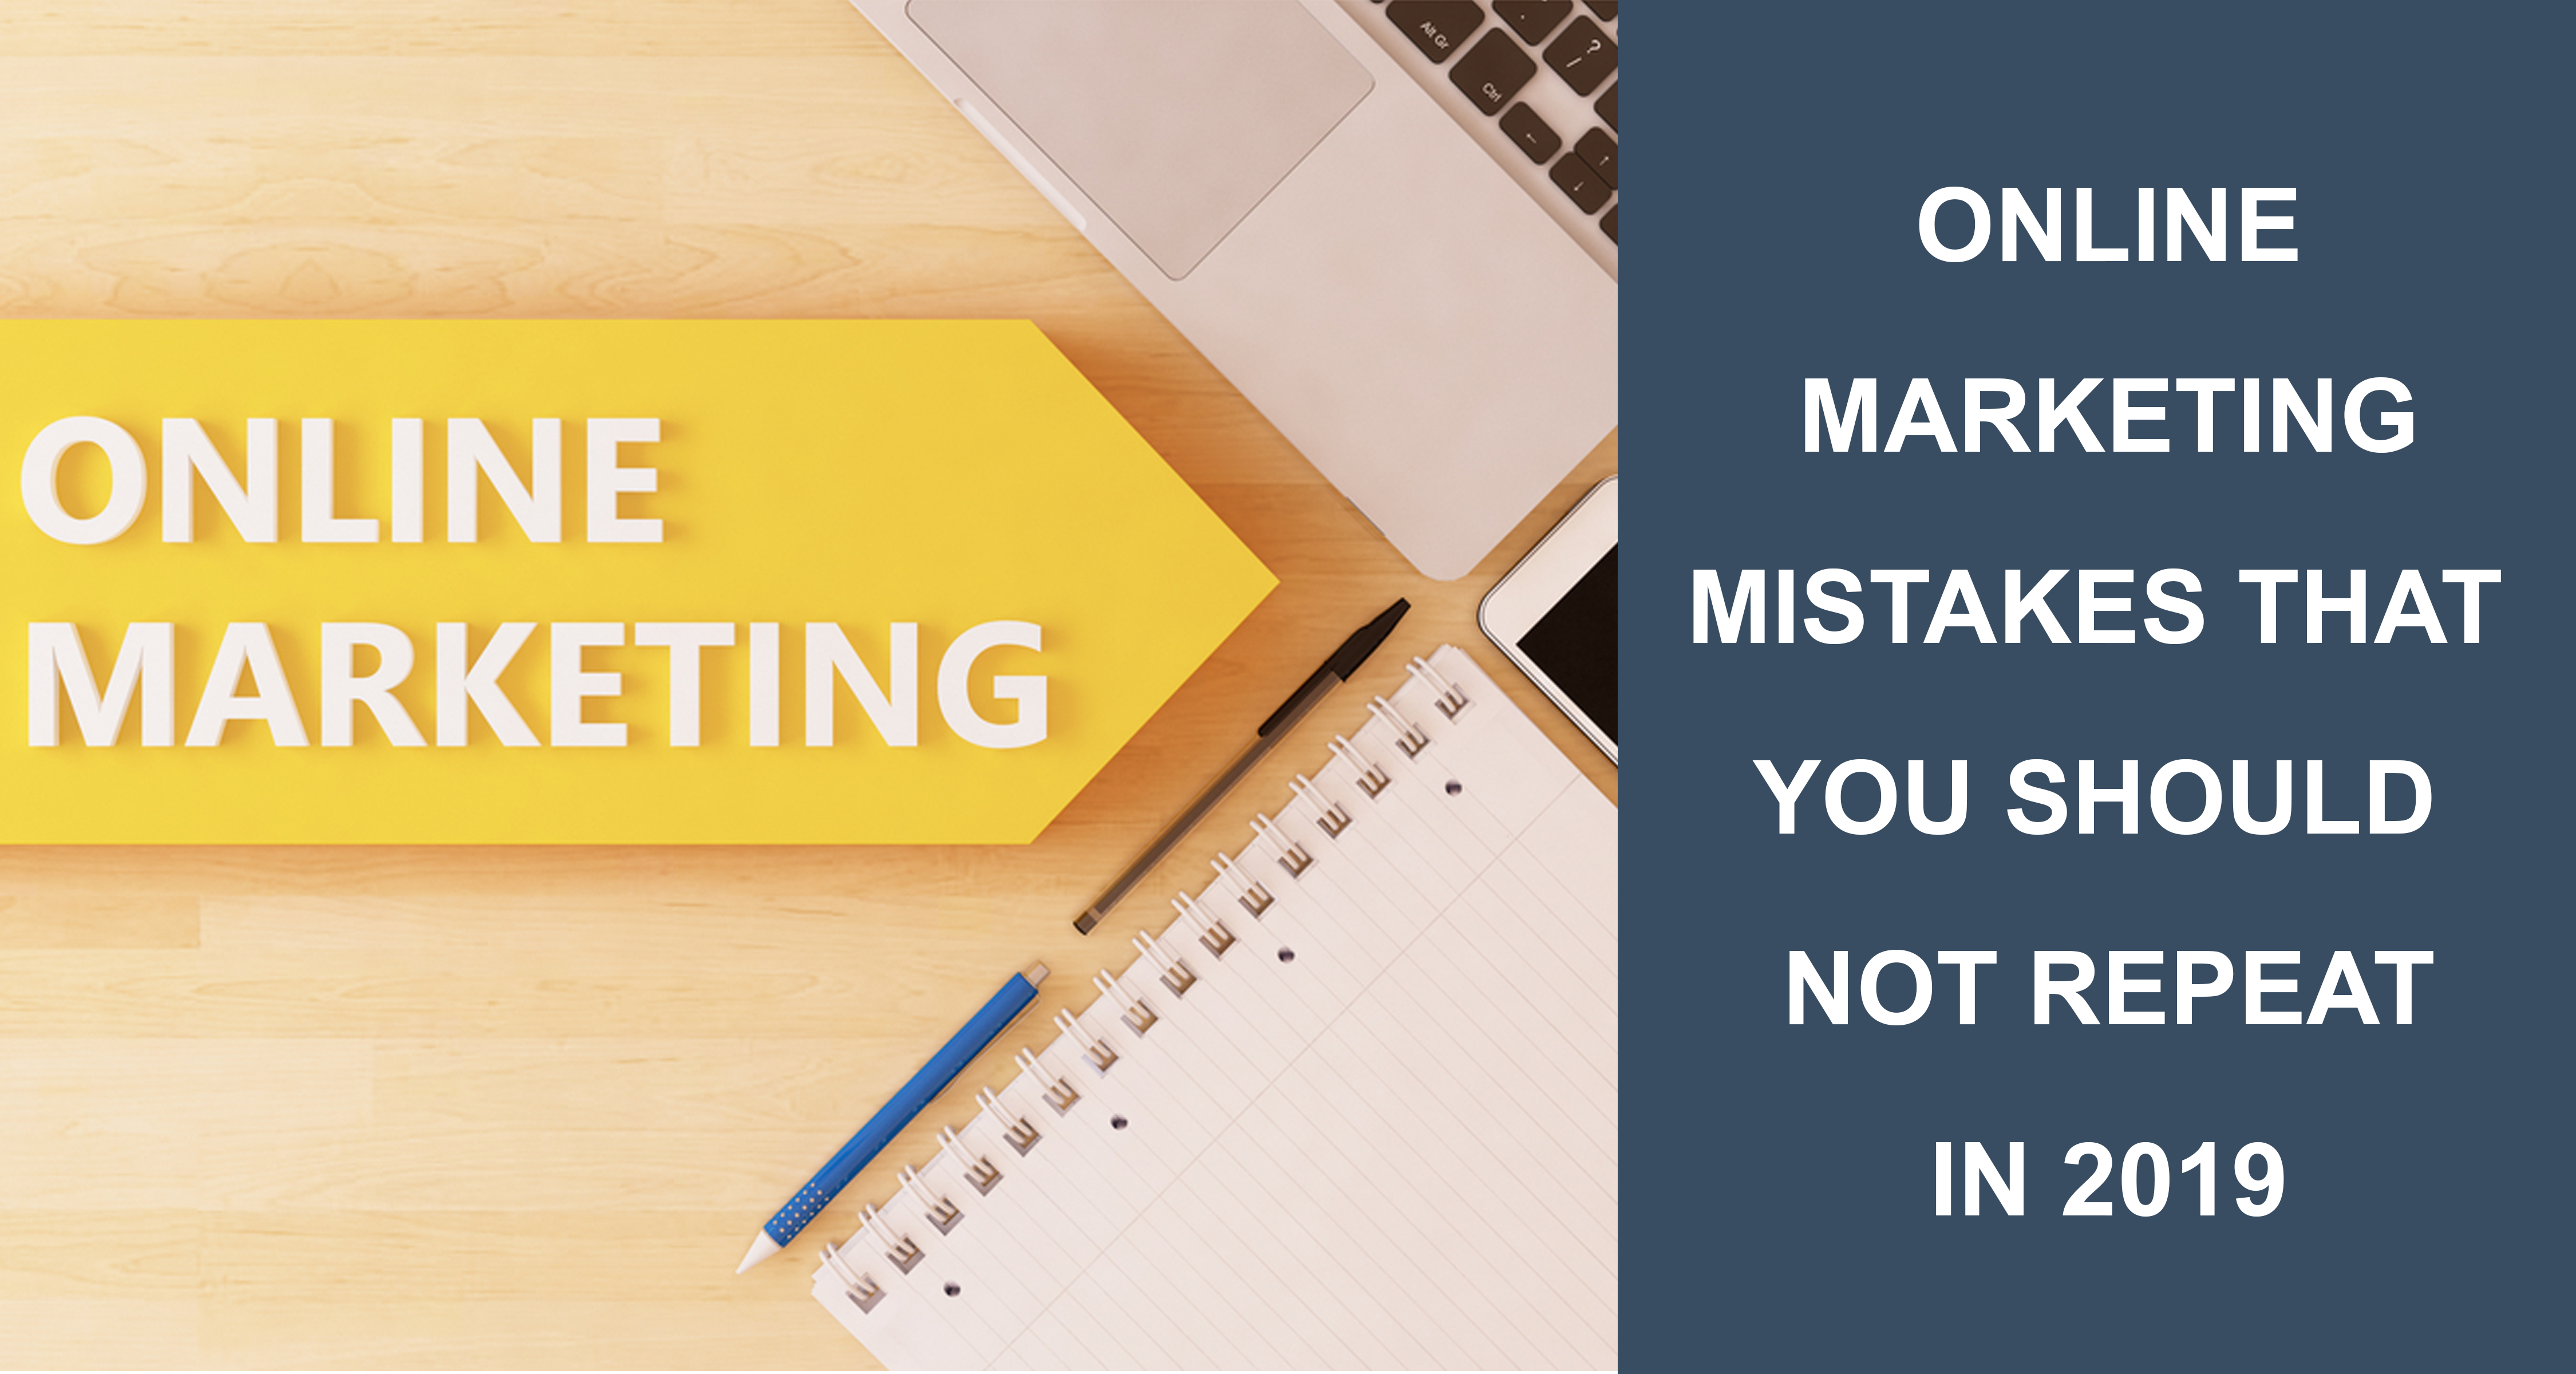 Online Marketing Mistakes That You Should Not Repeat In 2019